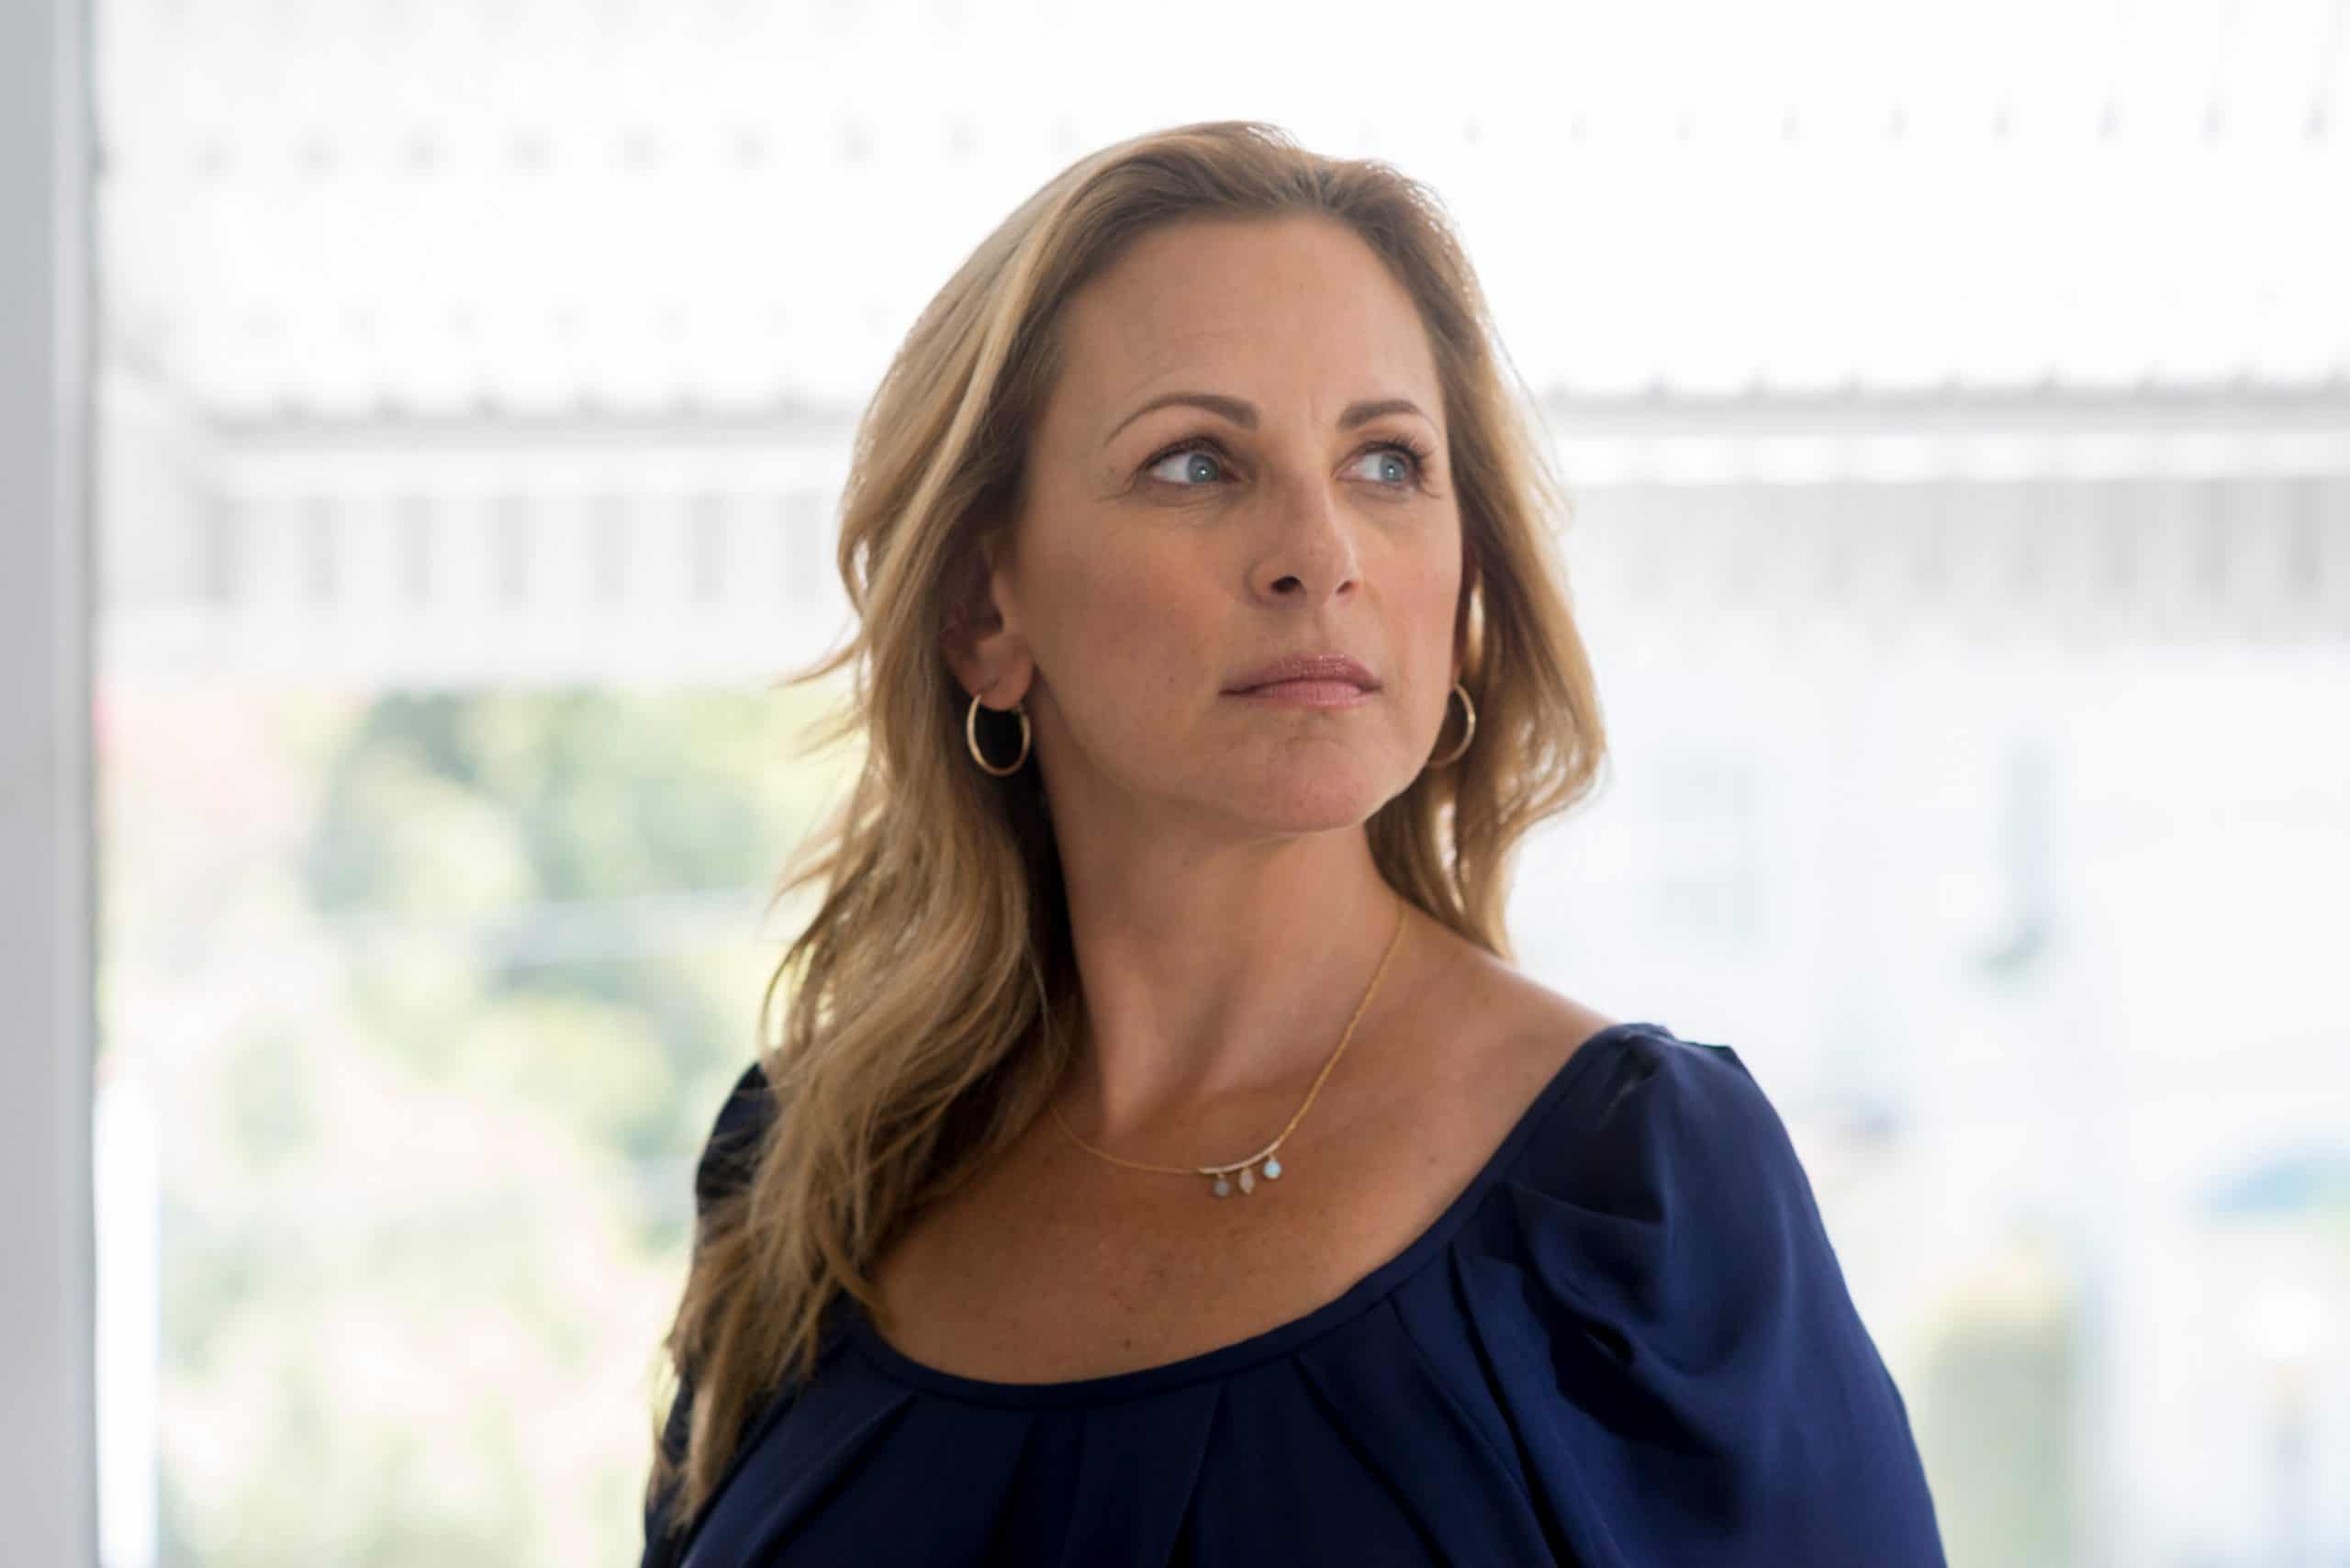 THIS CLOSE, Marlee Matlin in 'The Chances',